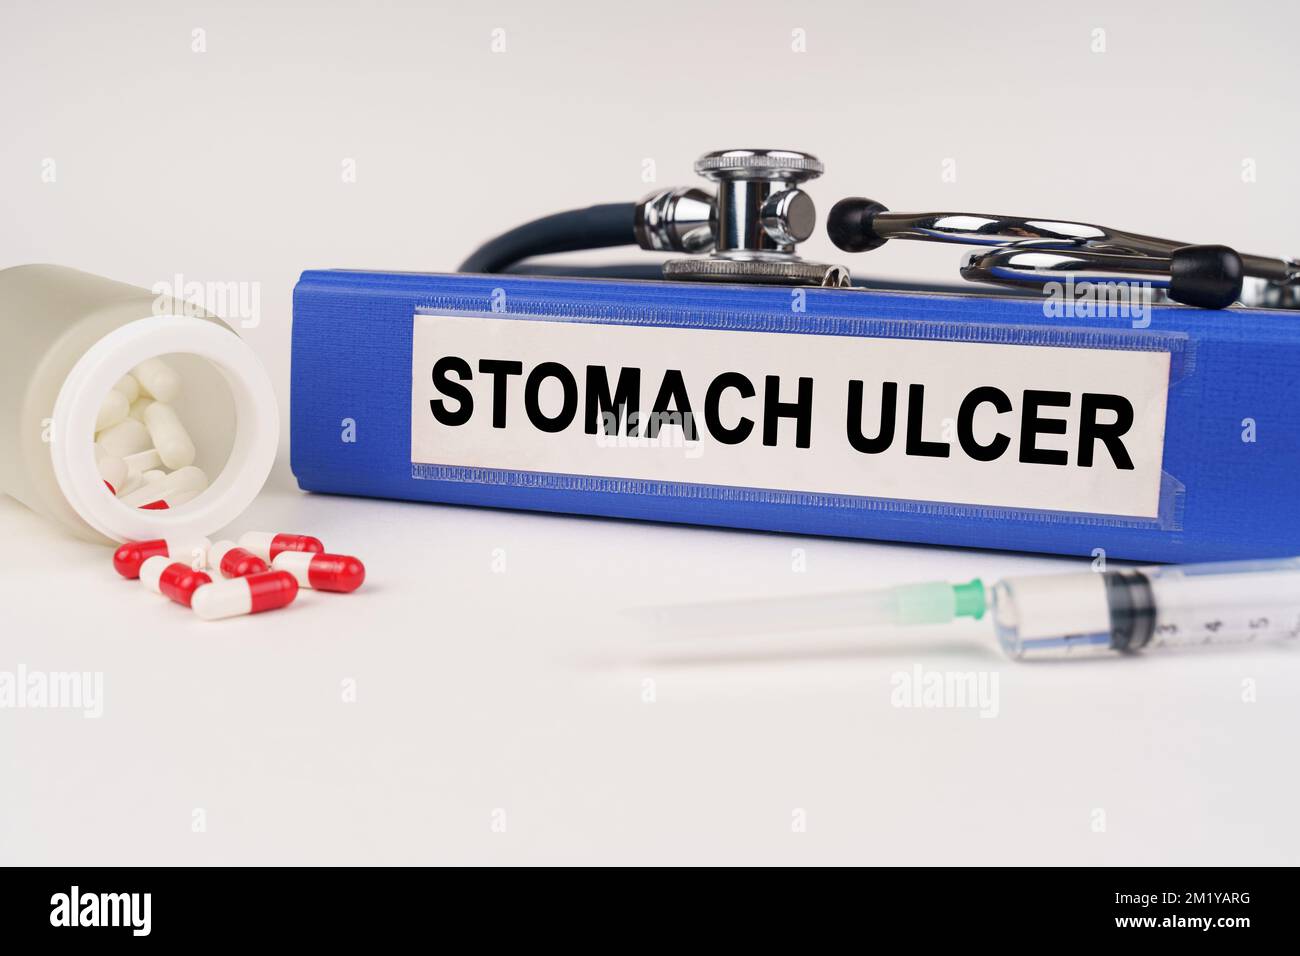 Medical concept. On a white surface there are pills, a syringe, a stethoscope and a folder with the inscription - Stomach ulcer Stock Photo